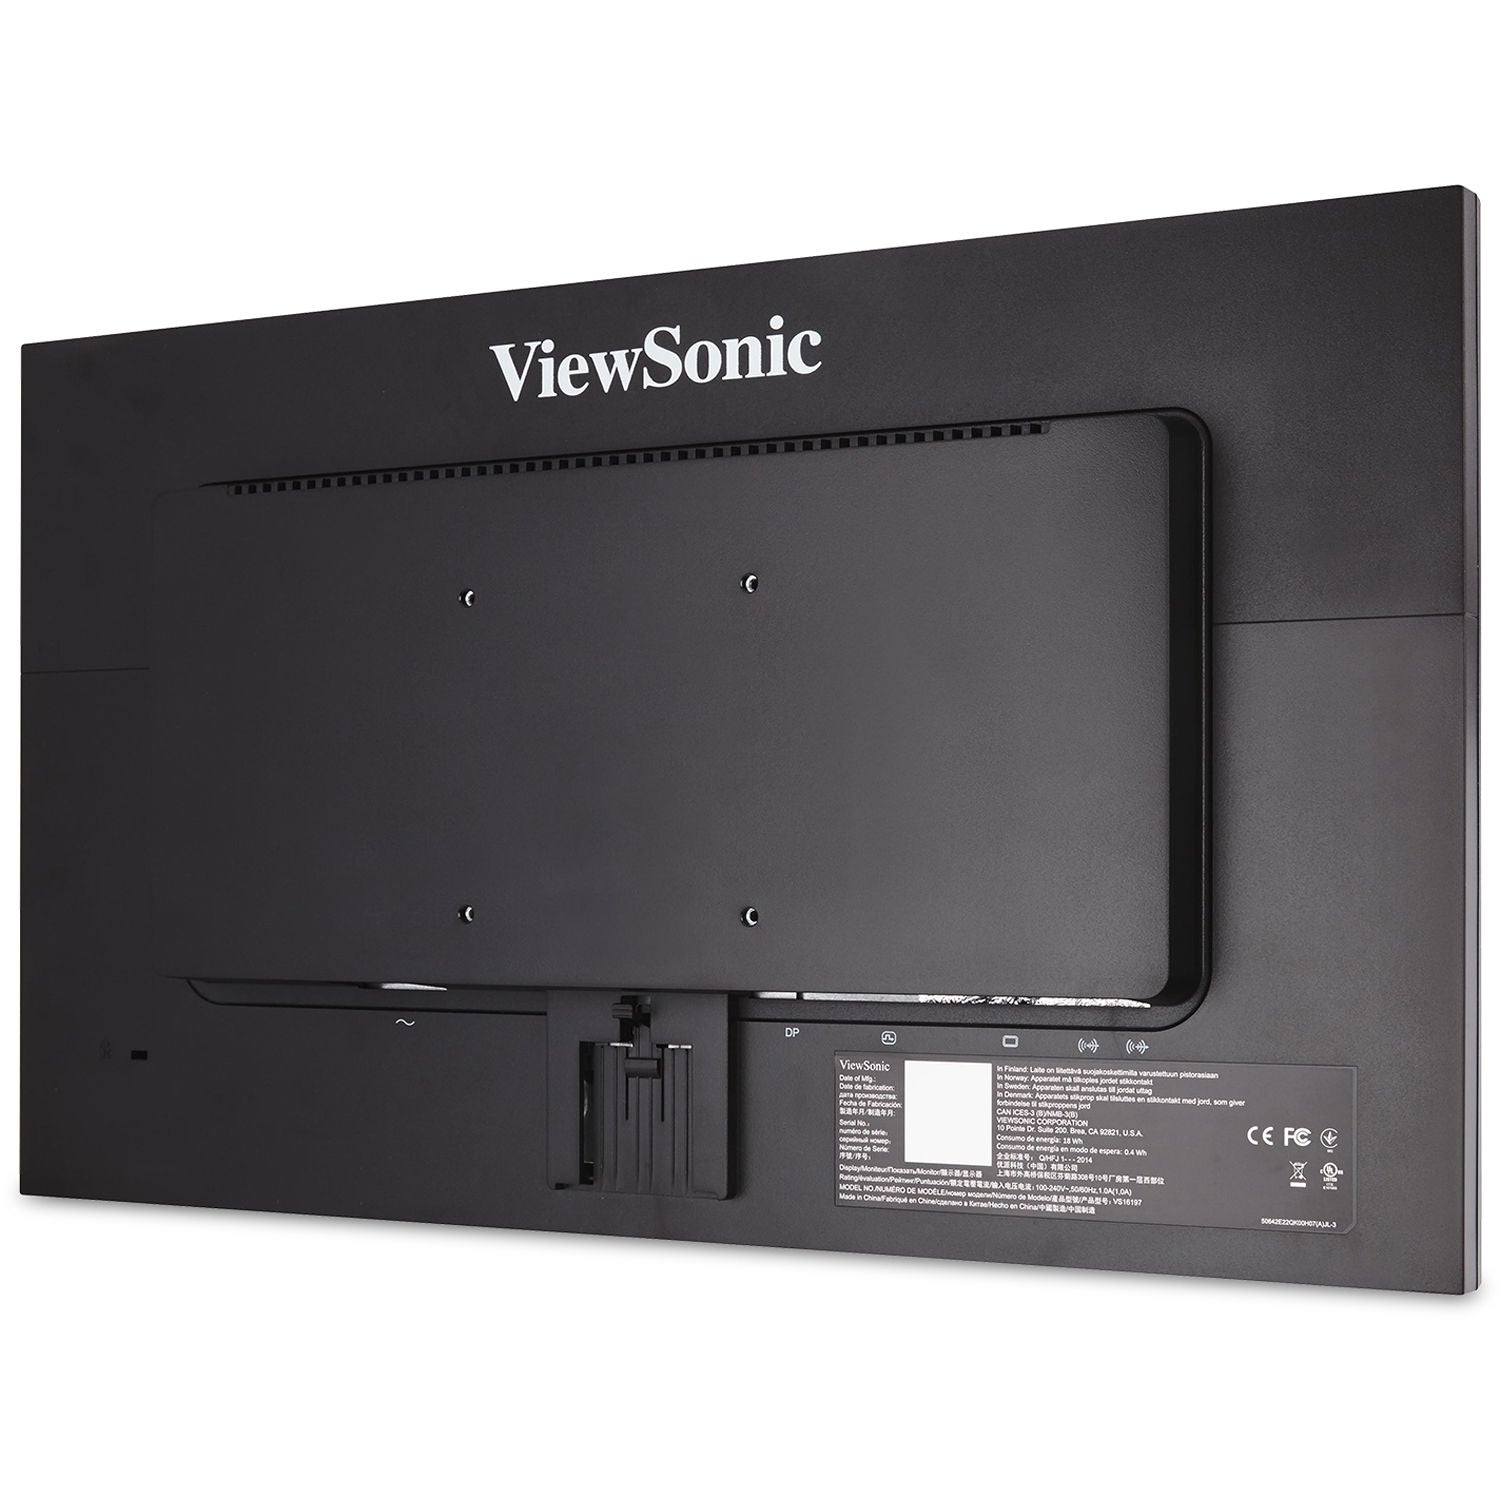 ViewSonic VA2252SM_H-2-S 22" (21.5" Viewable) Widescreen LED Monitor - Certified Refurbished